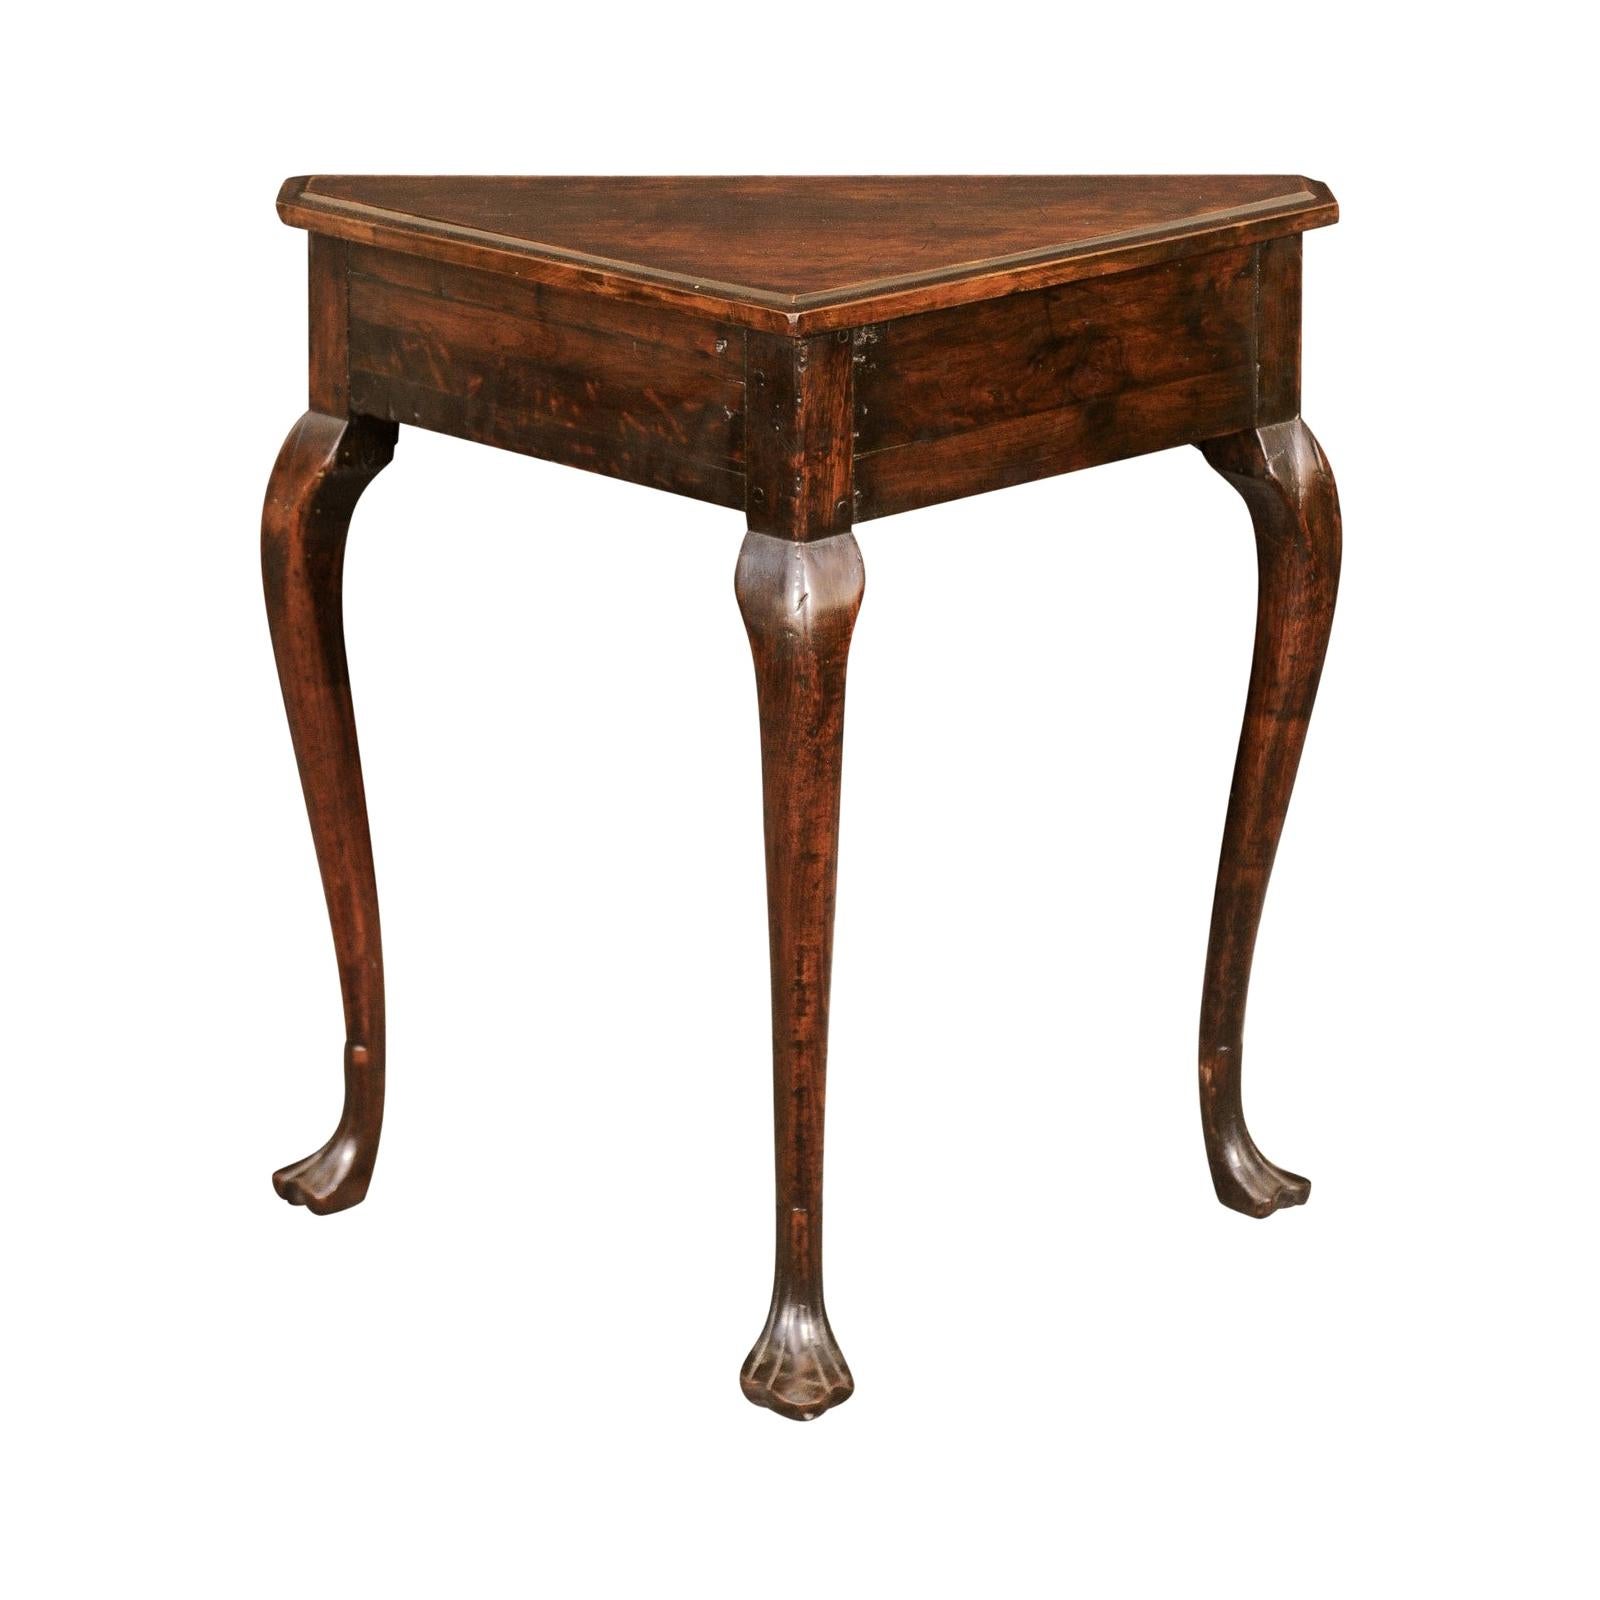 English 1830s Mahogany Console Table with Triangular Top and Cabriole Legs For Sale